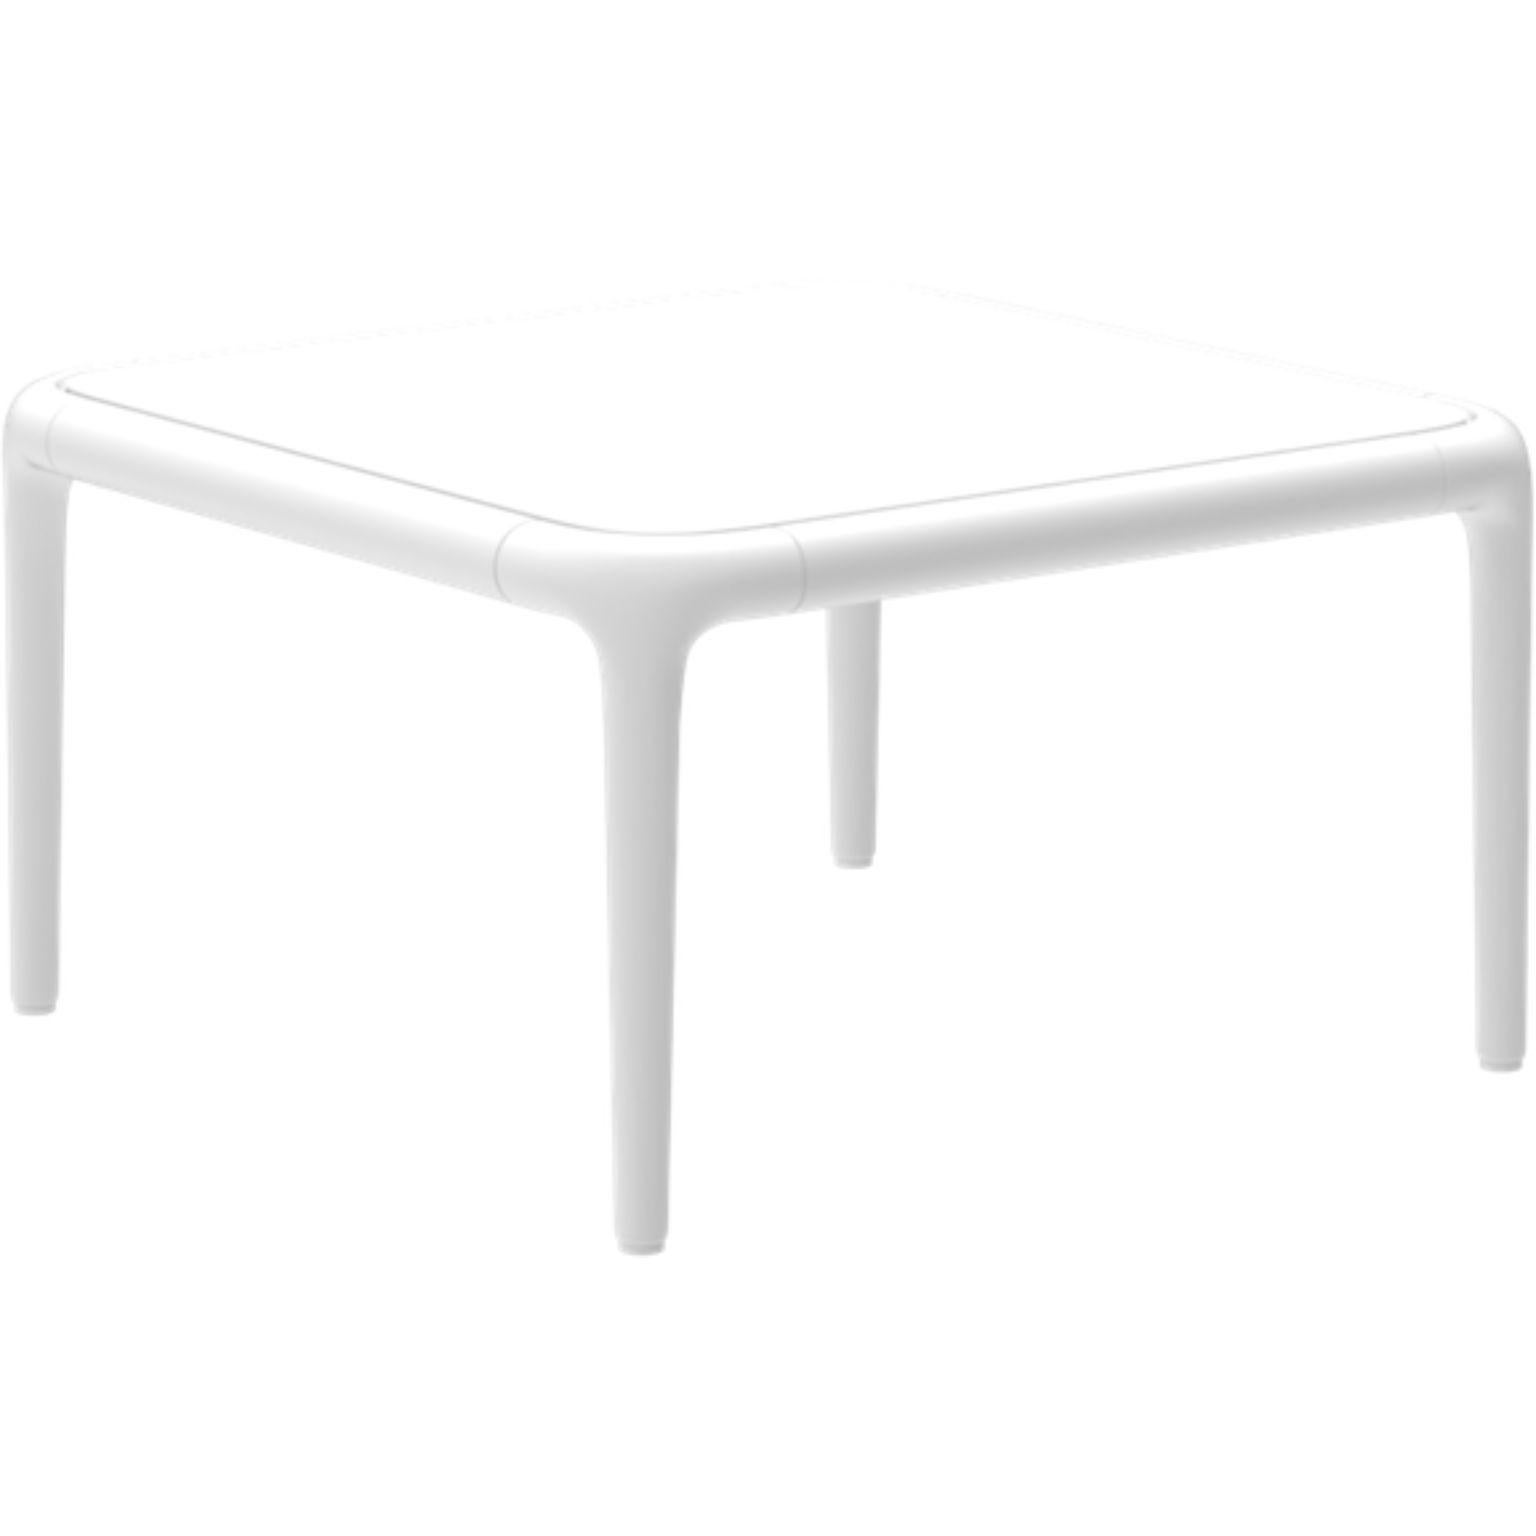 Xaloc white coffee table 50 with glass top by MOWEE
Dimensions: D50 x W50 x H28 cm
Materials: Aluminum, tinted tempered glass top.
Also available in different aluminum colors and finishes (HPL Black Edge or Neolith). 

Xaloc synthesizes the